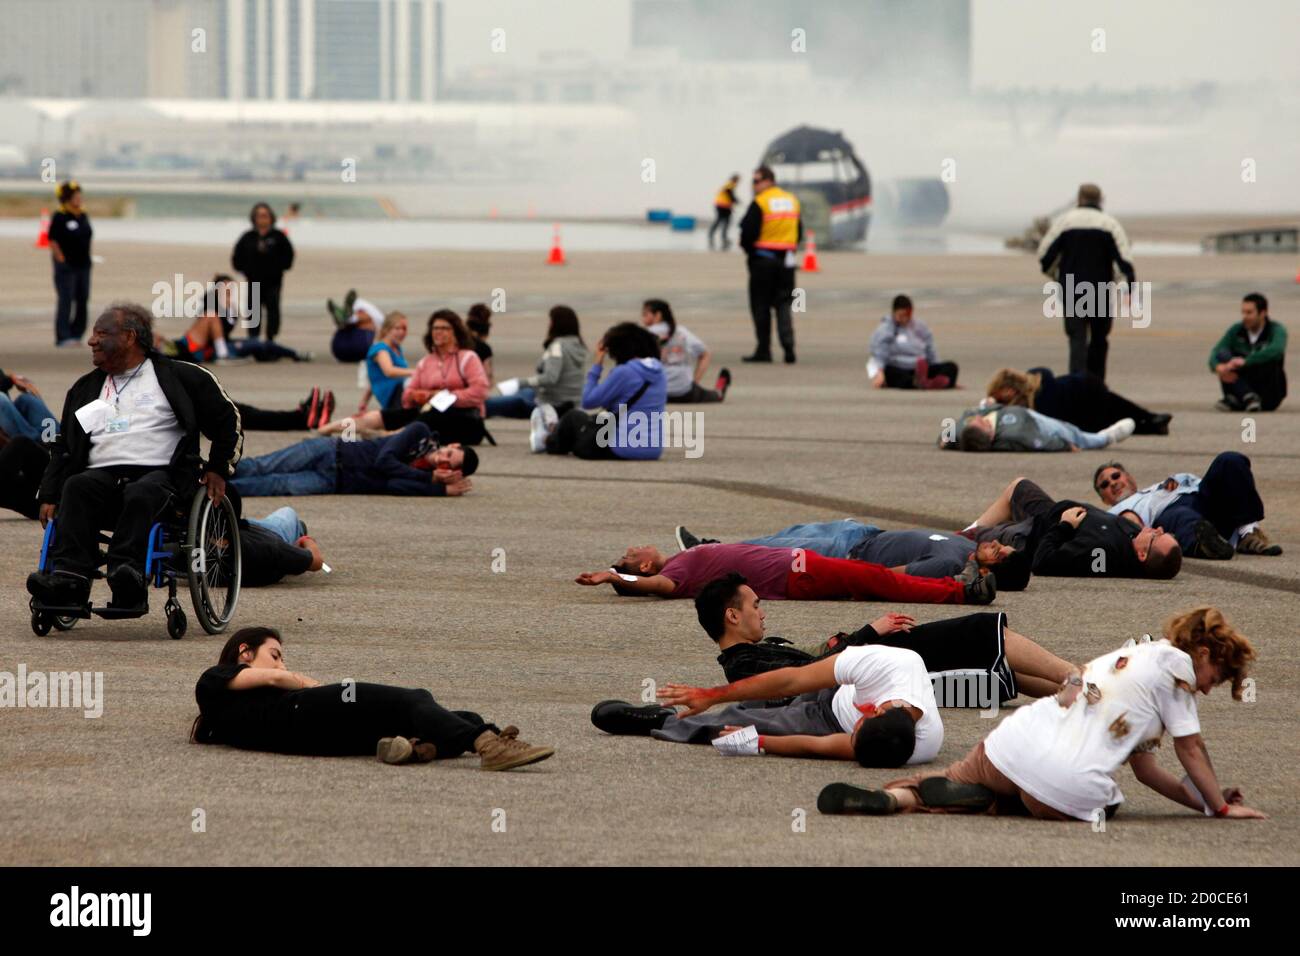 Actors portraying flight crash victims wait to be treated by emergency personnel during the full-scale, LAX Air Exercise aircraft disaster simulation training drill at Los Angeles International Airport (LAX), in Los Angeles, California April 24, 2013. The LAX AirEx is a two-hour long simulated aircraft disaster with over 100 volunteers in moulage, role-playing as accident victims and is designed to test LAX's Emergency Response Plan, as required by the Federal Aviation Administration (FAA) at least once every three years to evaluate the operational capability and readiness of LAX's emergency m Stock Photo